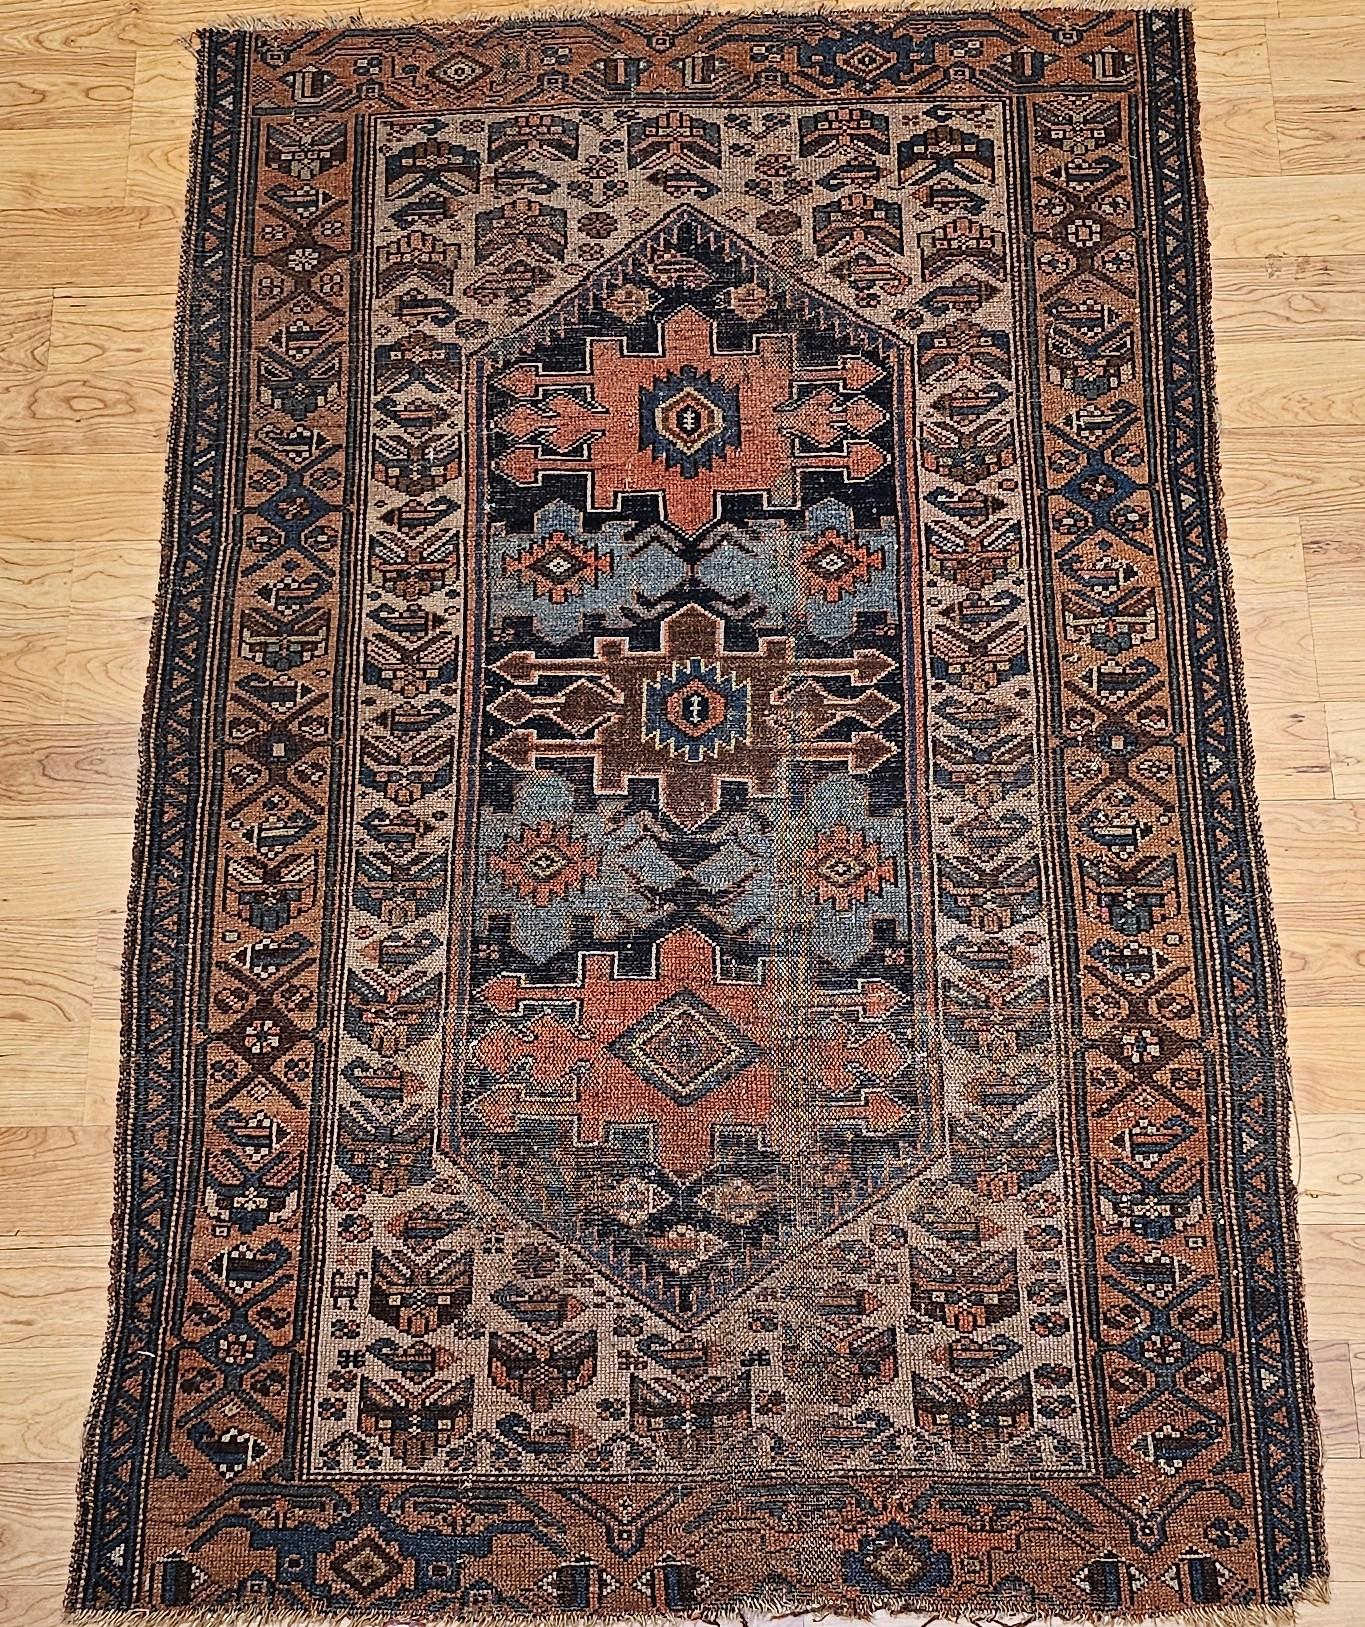 Vintage Persian Malayer area rug in an allover geometric pattern set on an ivory background with a brick red  border and accents colors in turquoise, brown, green, and red circa the late 1800s.    The larger format geometric medallion designs in the